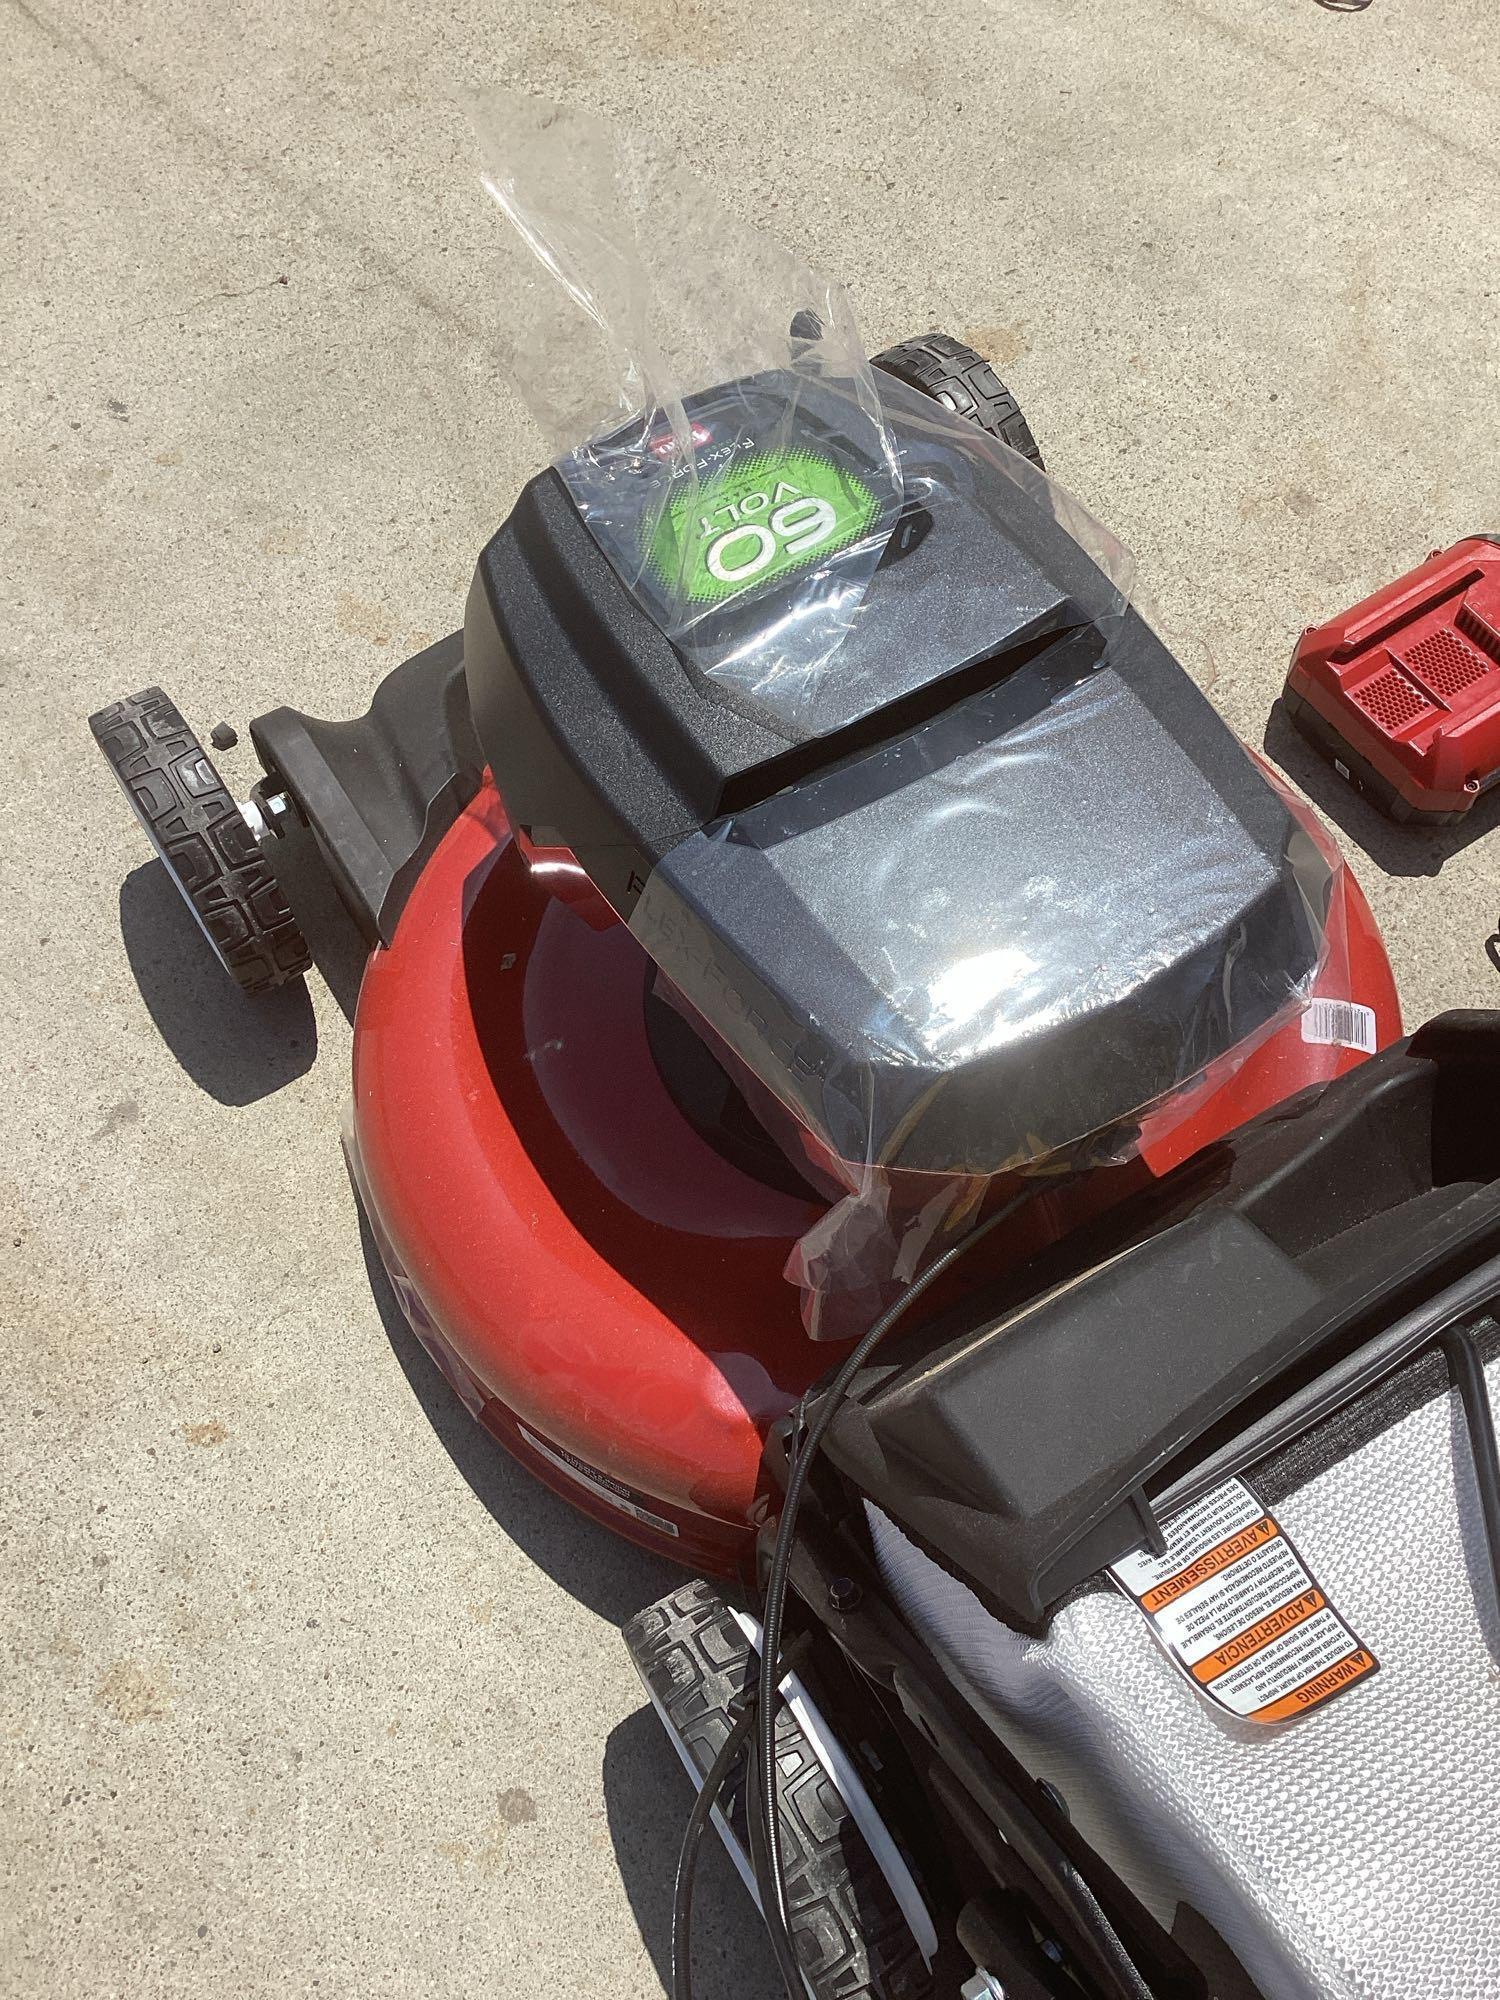 Toro 60V Max* 21 in.Recycler Self-Propel Lawn Mower*TURNS ON*WITH BATTERY,CHARGER AND KEY*